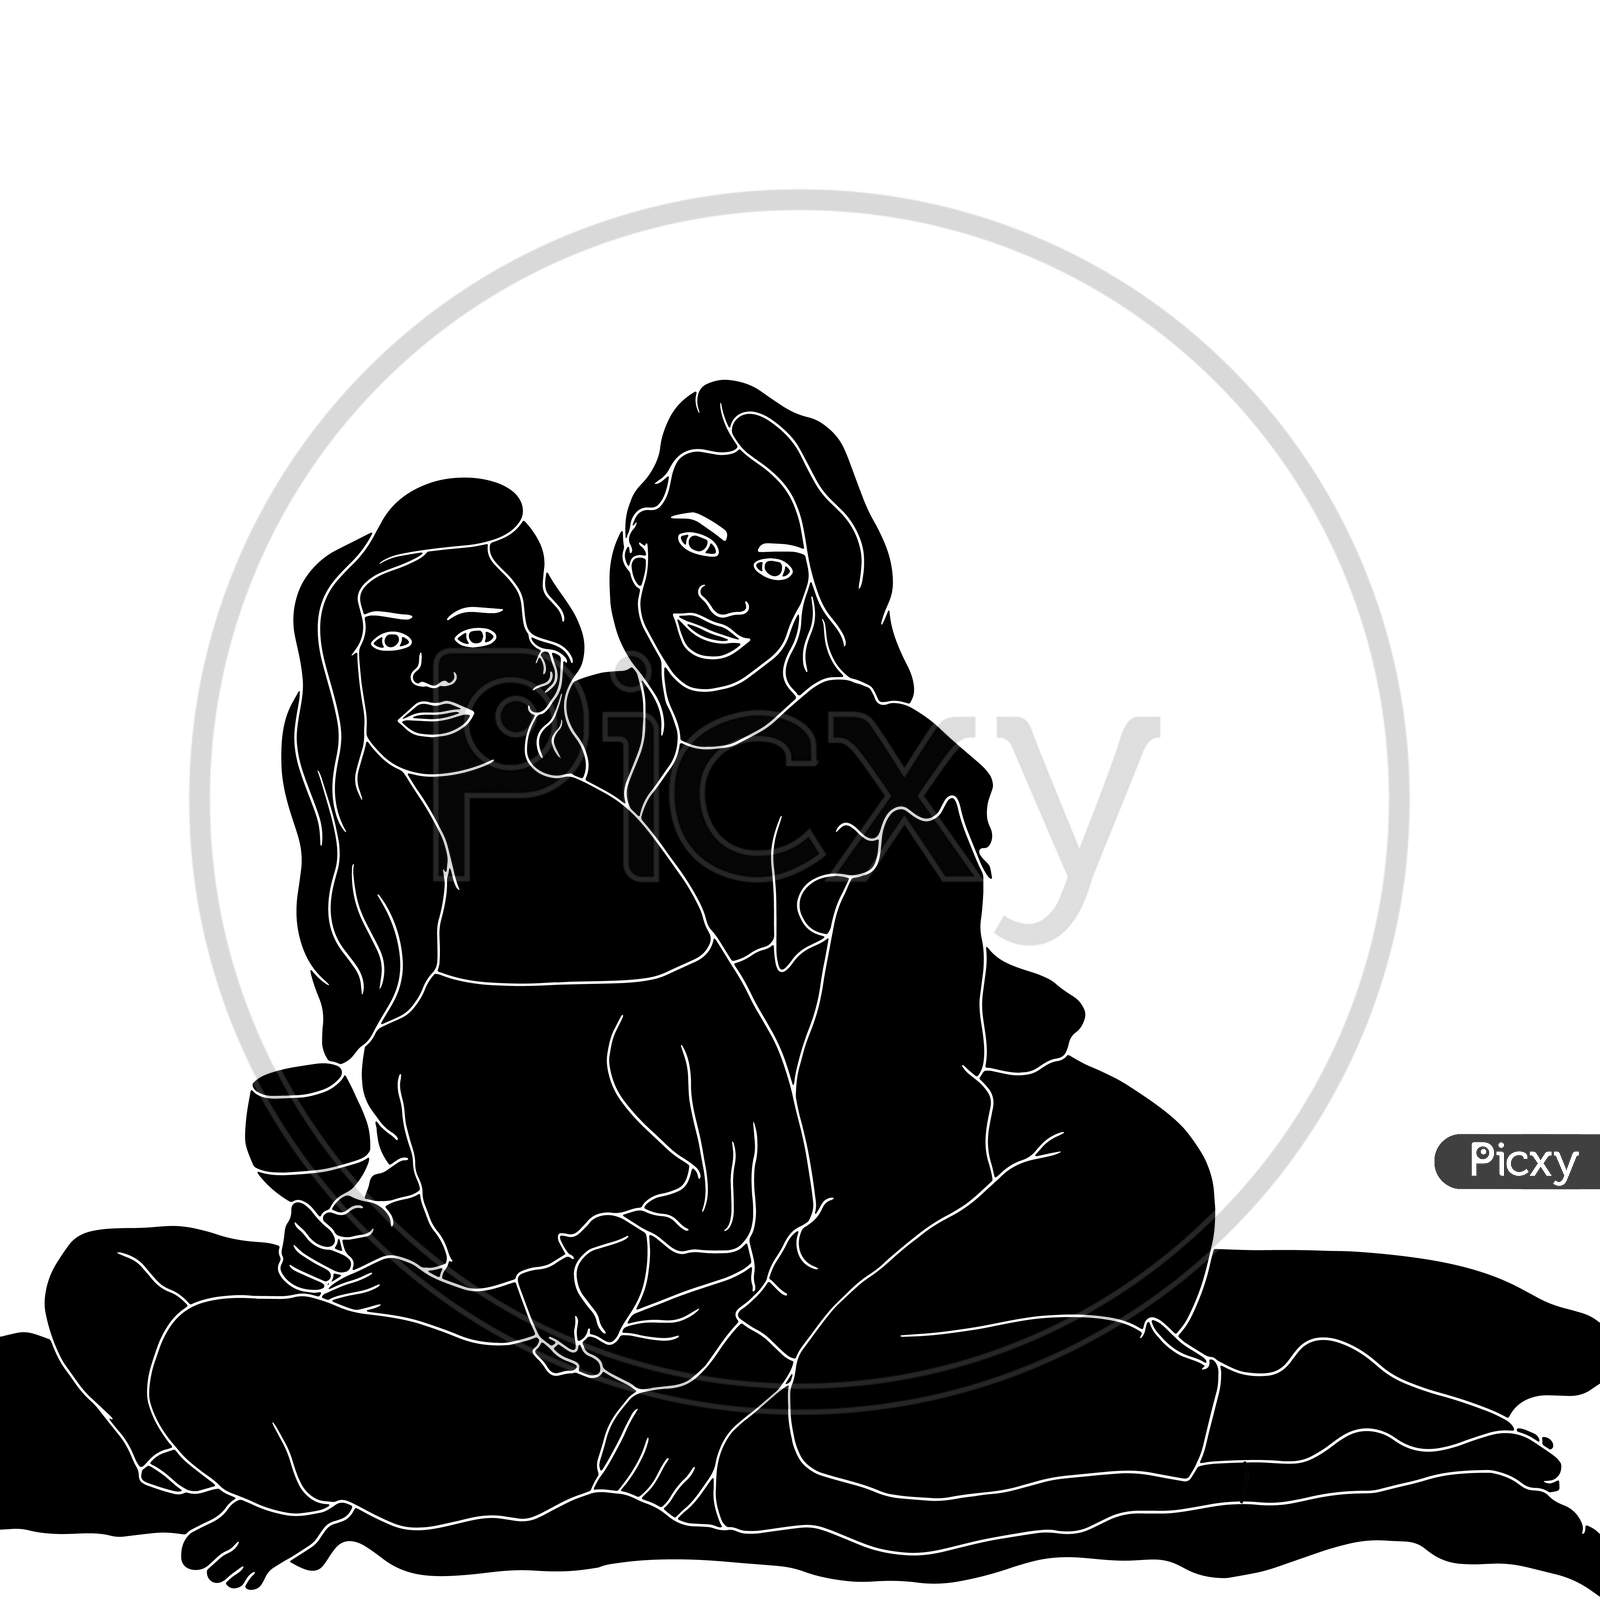 Two Girls Sitting On The Carpet, Happy Girls, The Silhouette Of People For Friendship Day. Hand-Drawn Character Illustration Of Happy People.